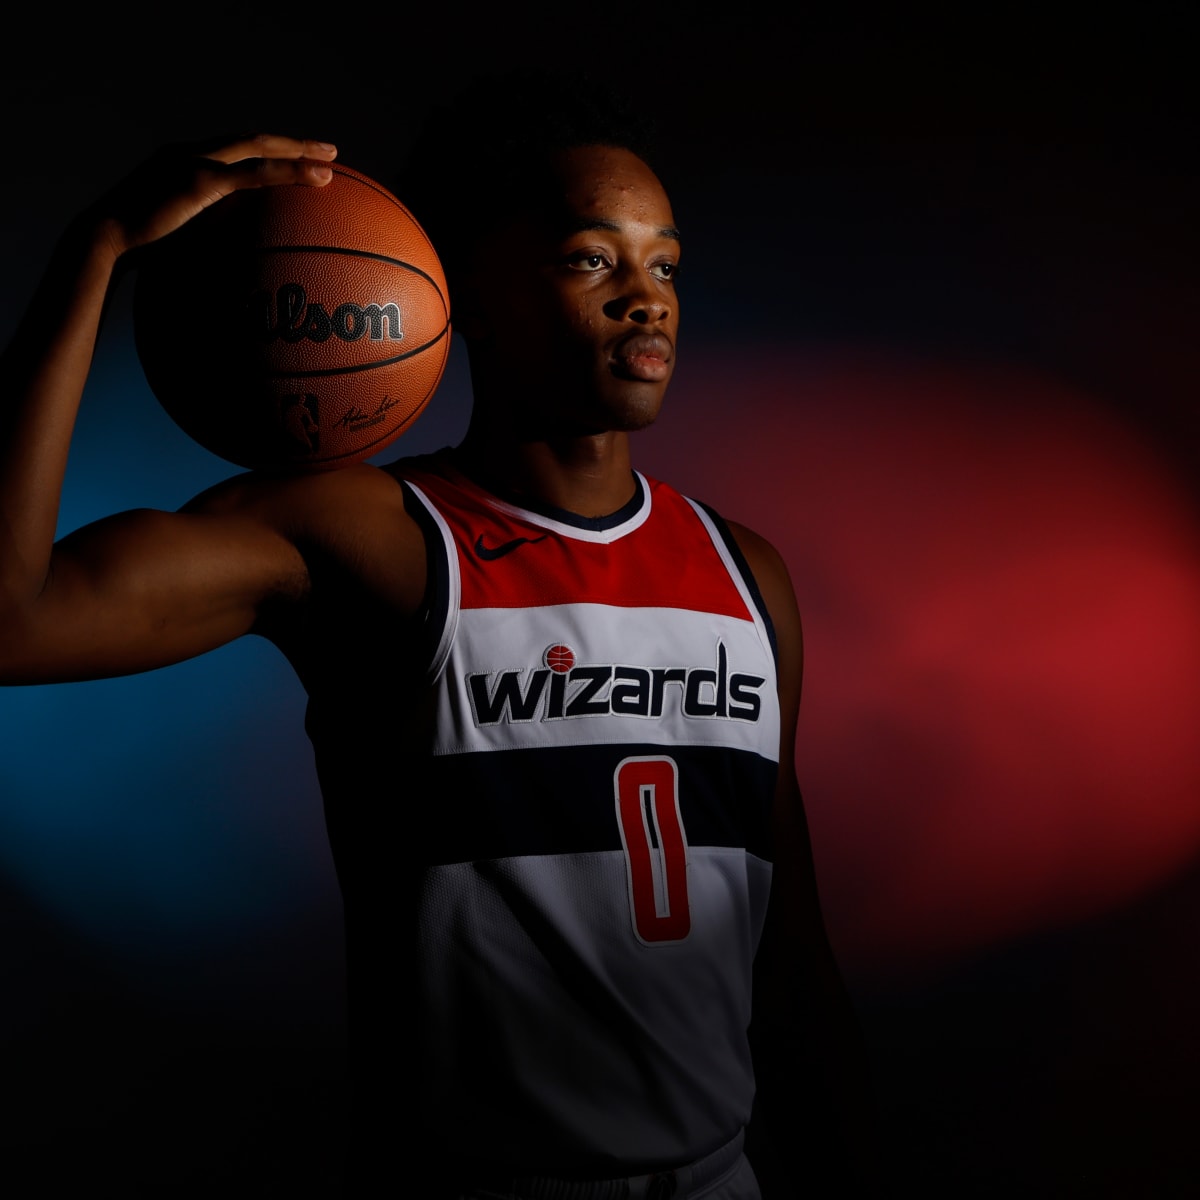 Washington Wizards: 25 Best To Play For The Wizards - Page 26